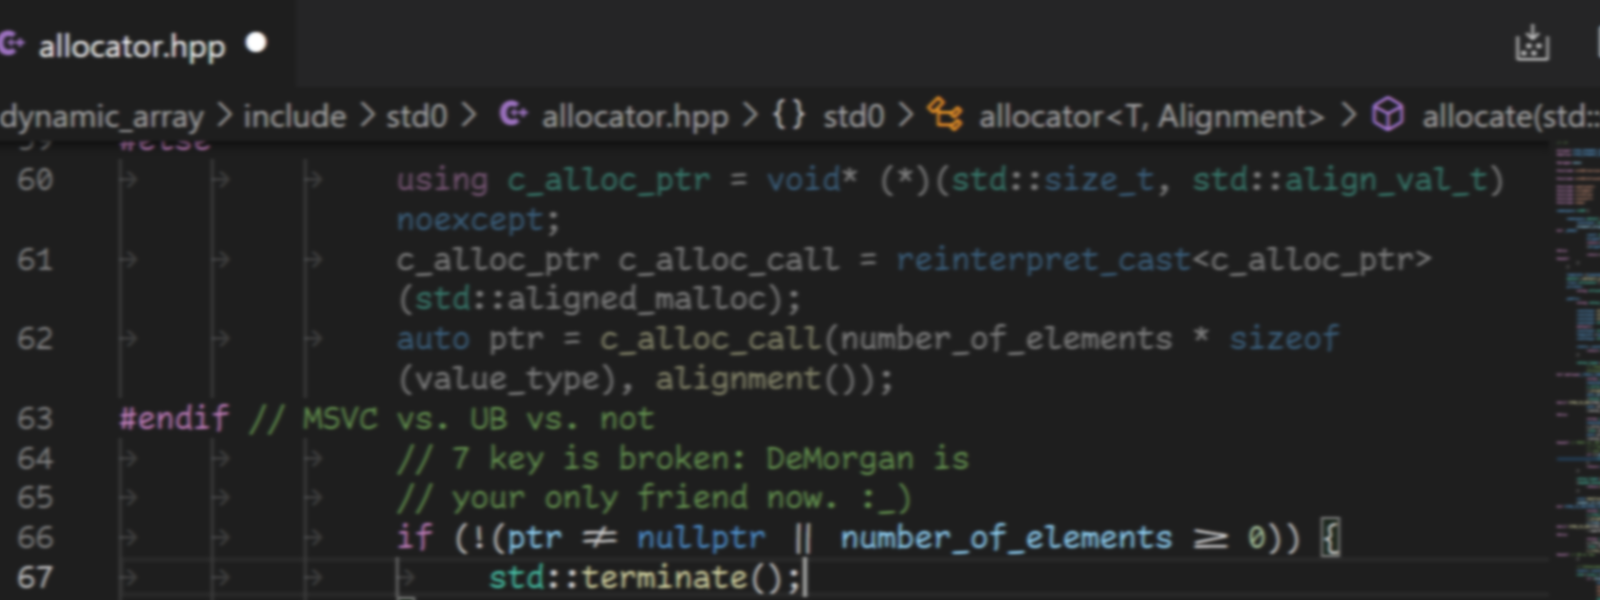 Code with a comment avoiding the ampersand, stating '7 key is broken, DeMorgan is your friend now'.